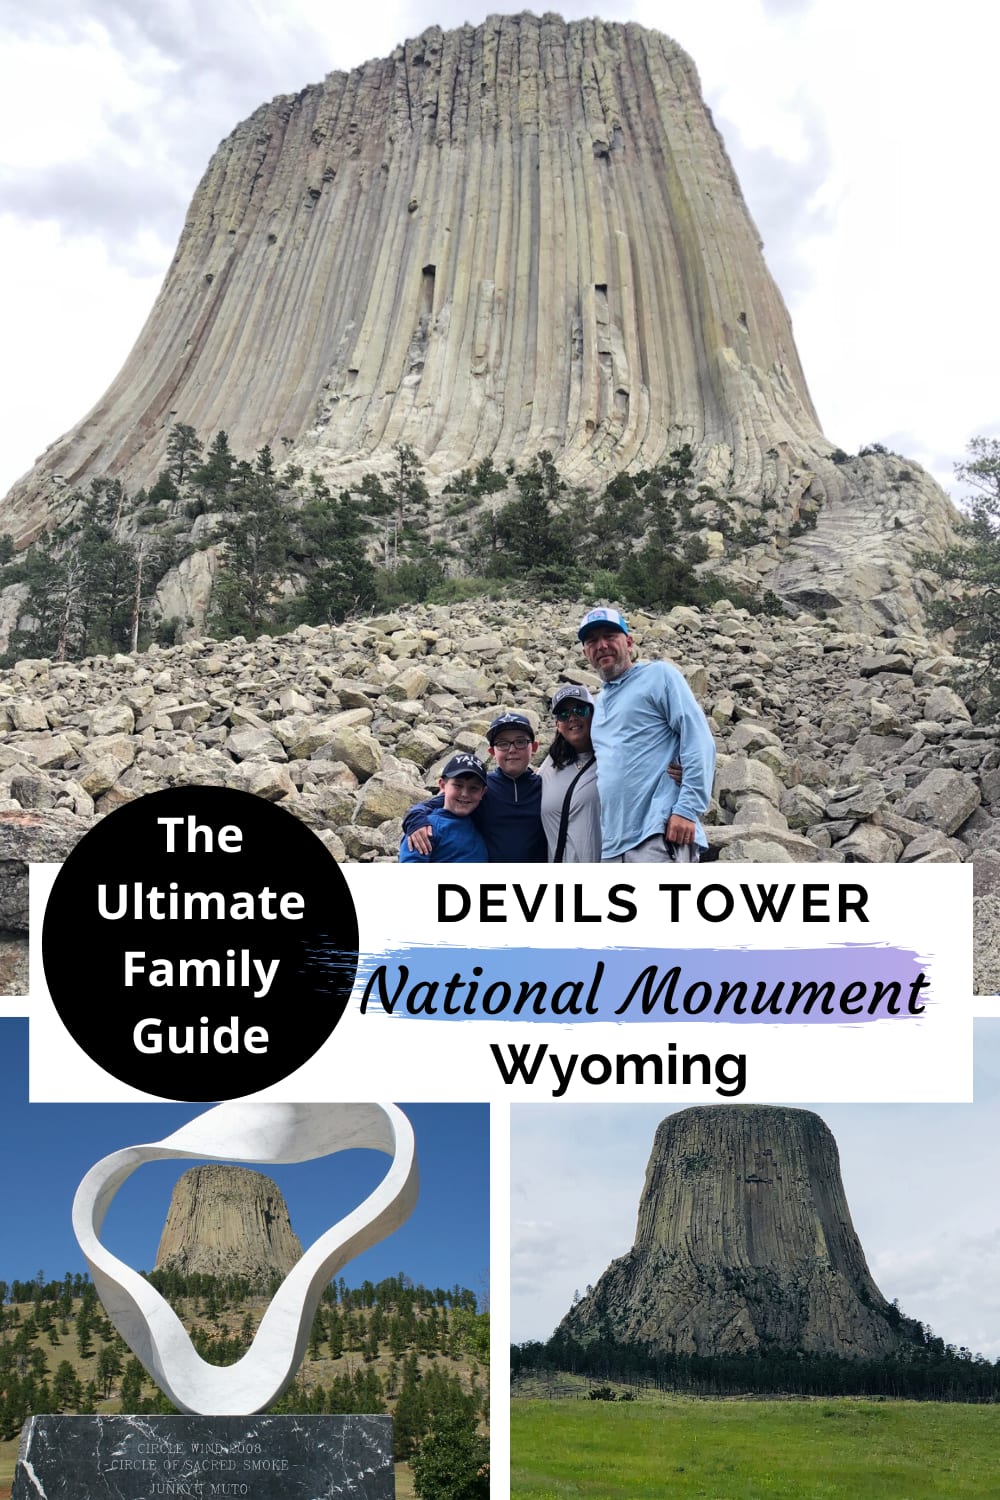 The Complete Guide To Devils Tower